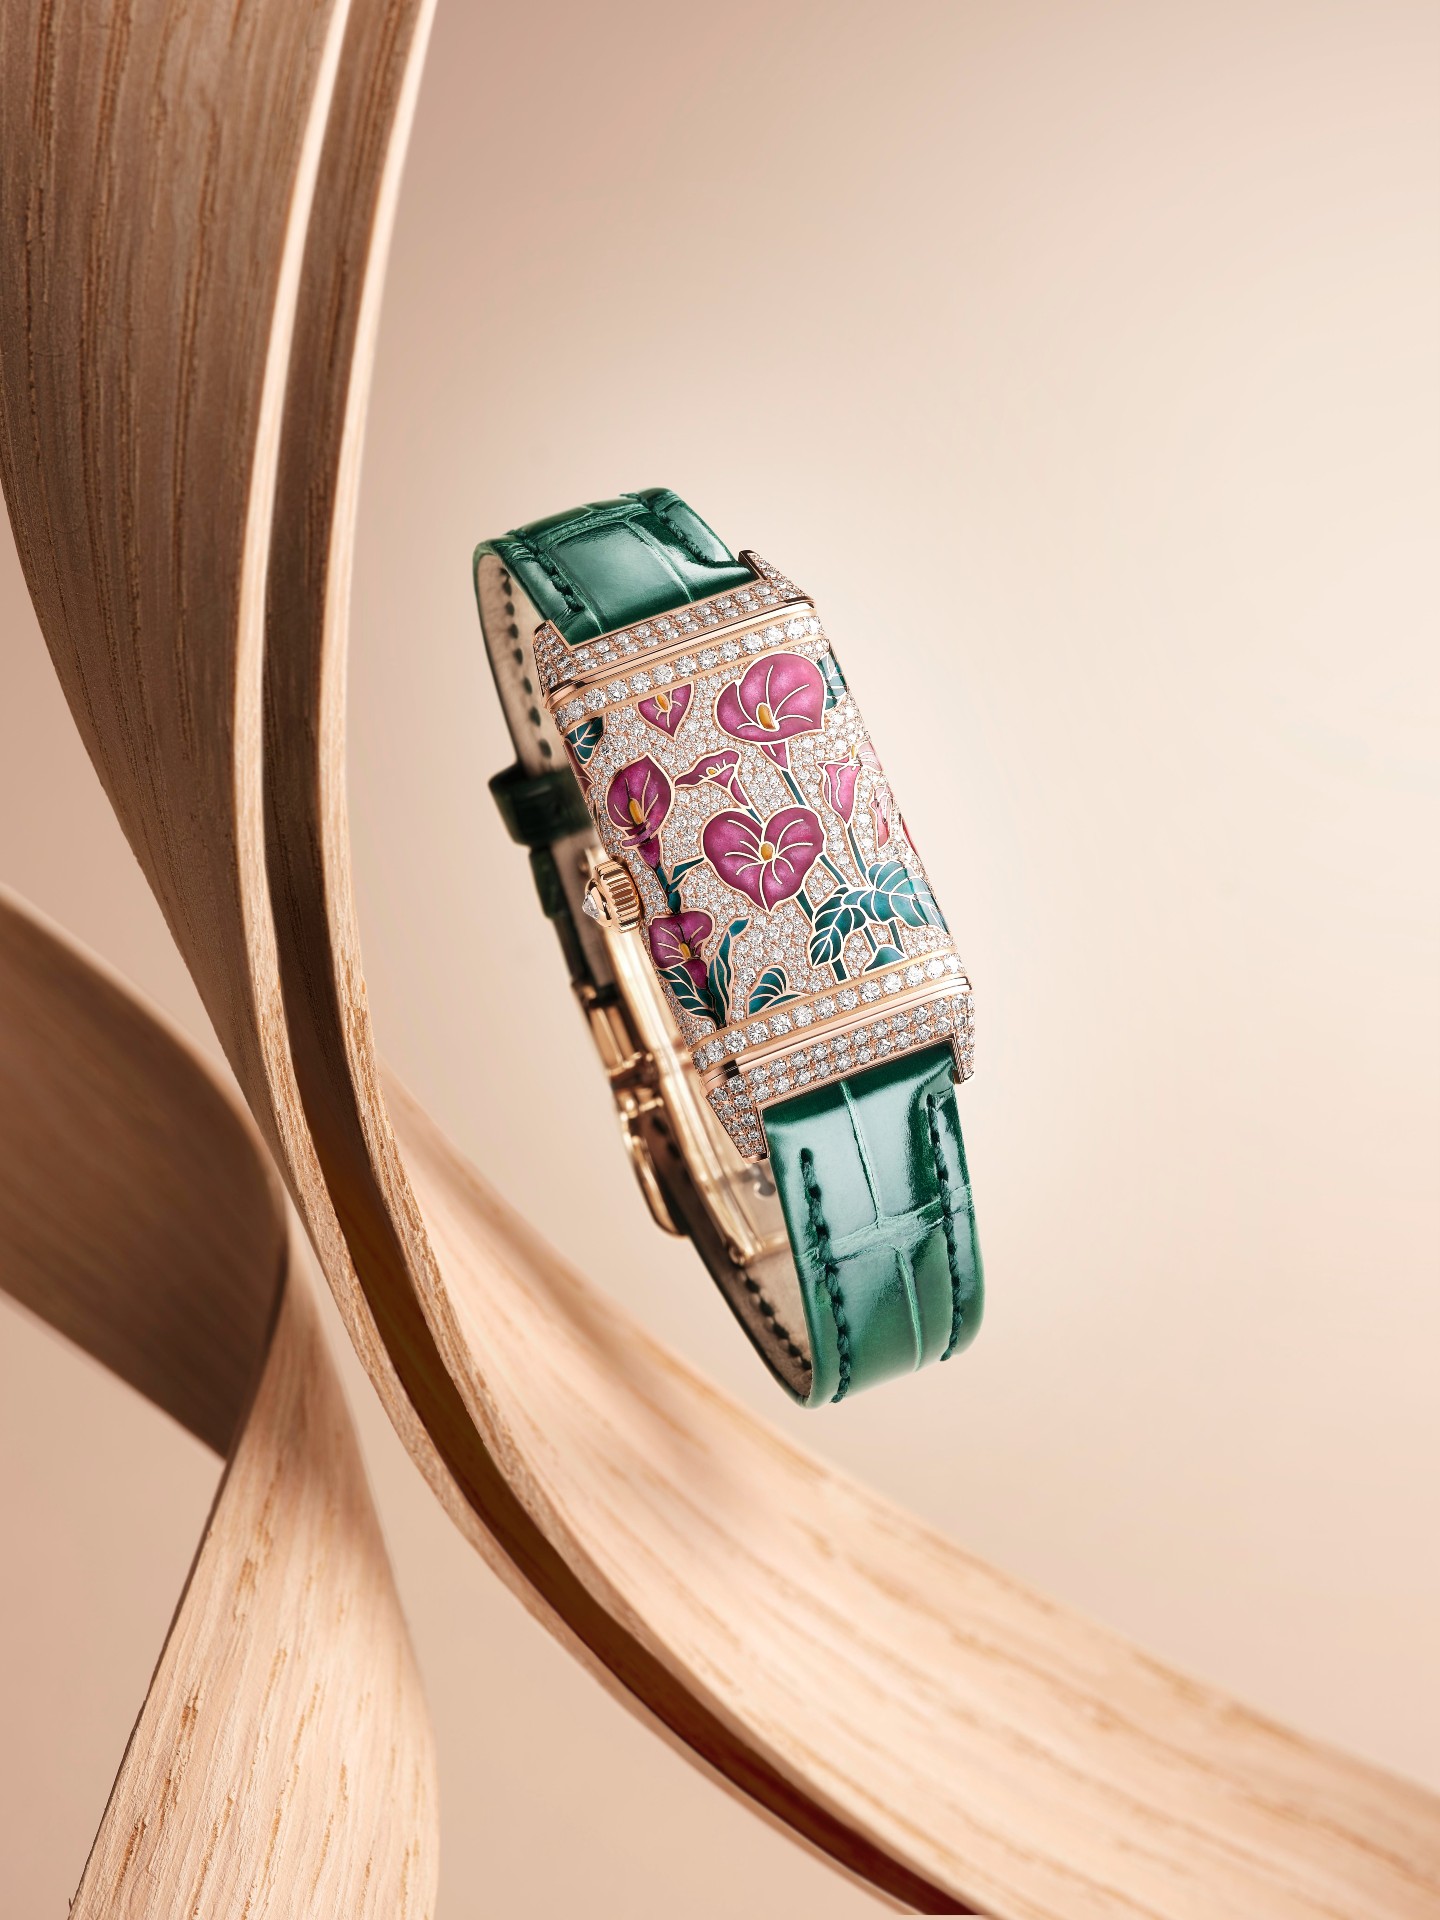 Jaeger-LeCoultre Introduces Four Sparkling New Reverso One Timepieces